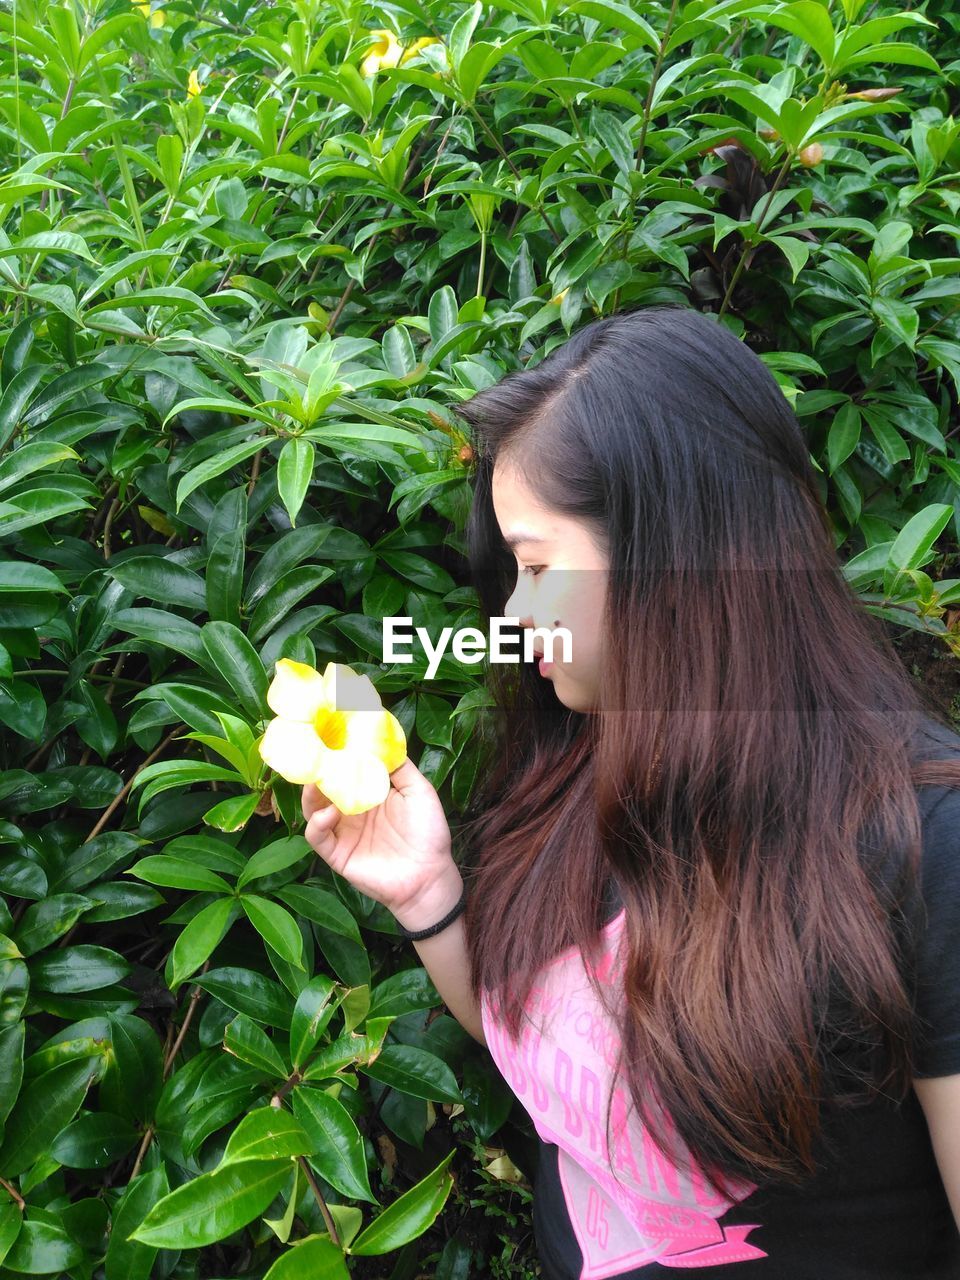 Young woman with long hair looking at flower by plants